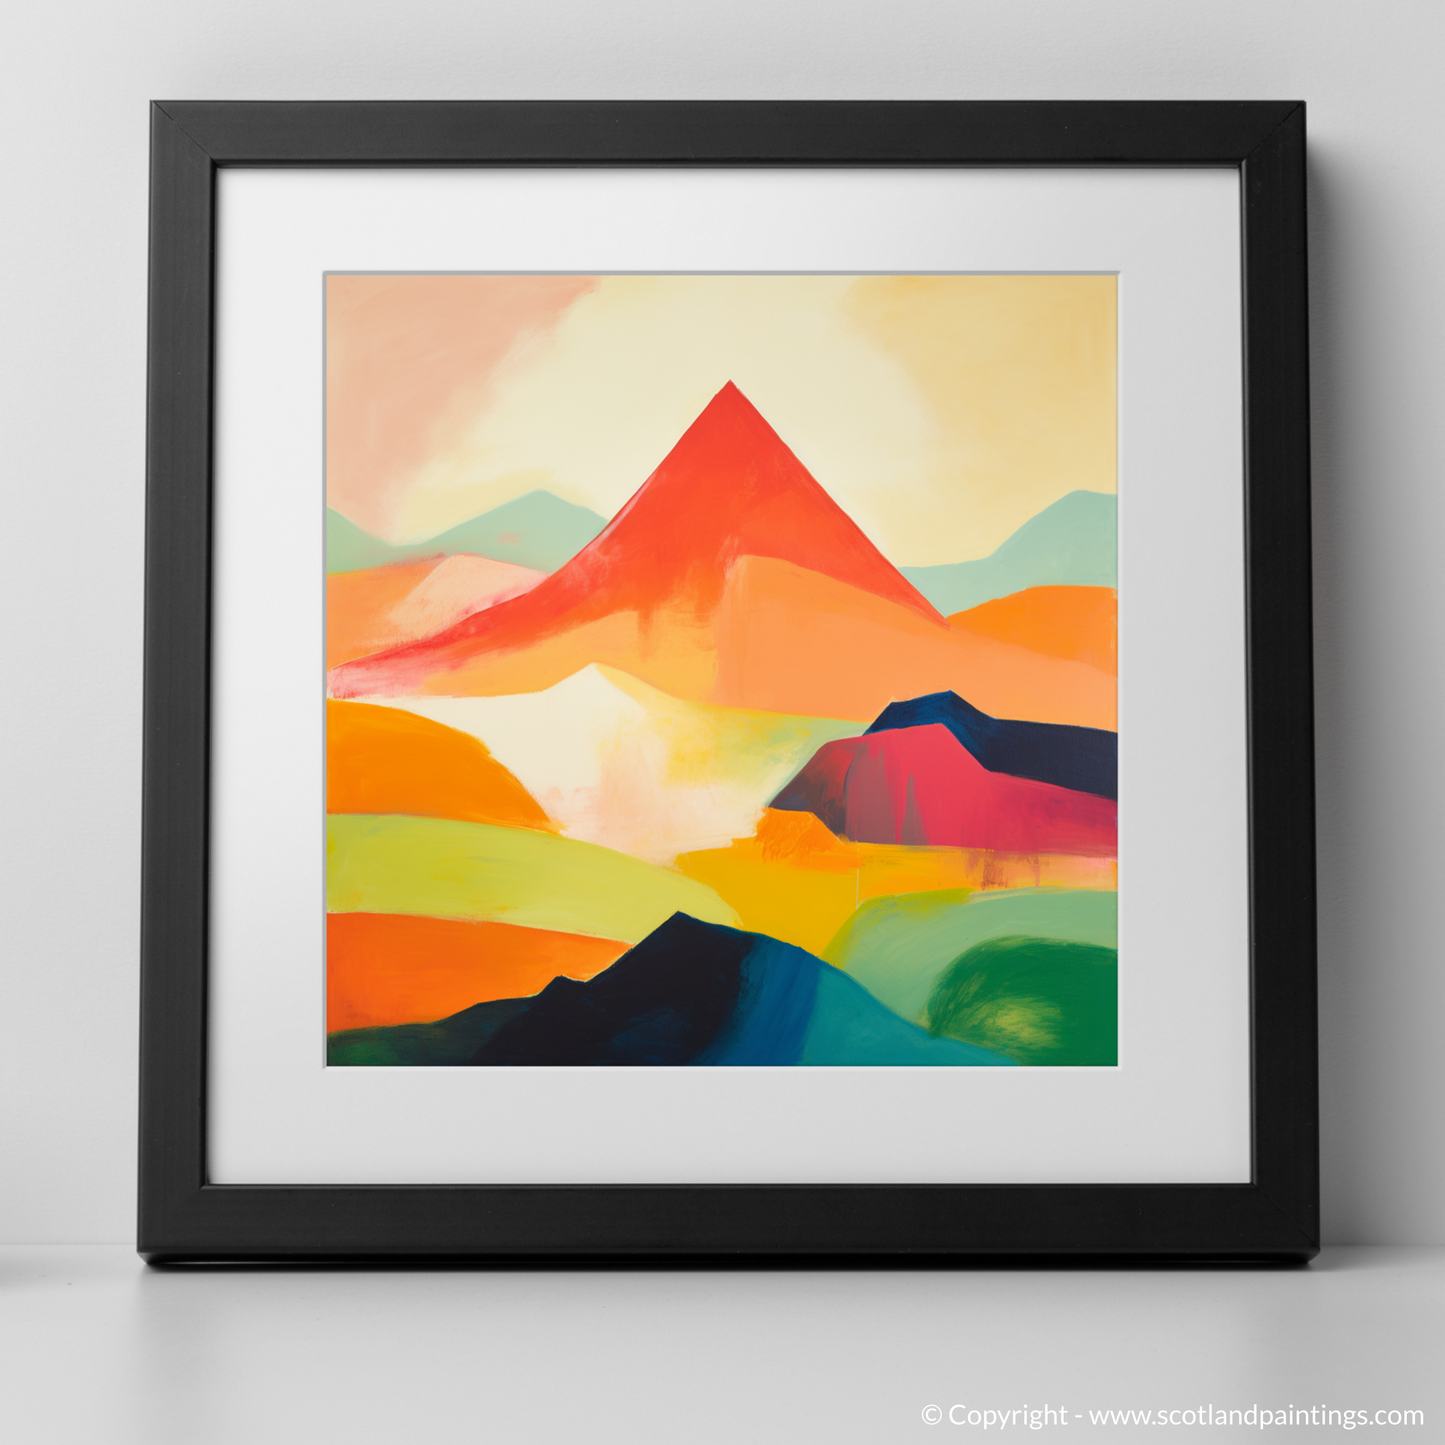 Art Print of Mount Keen with a black frame